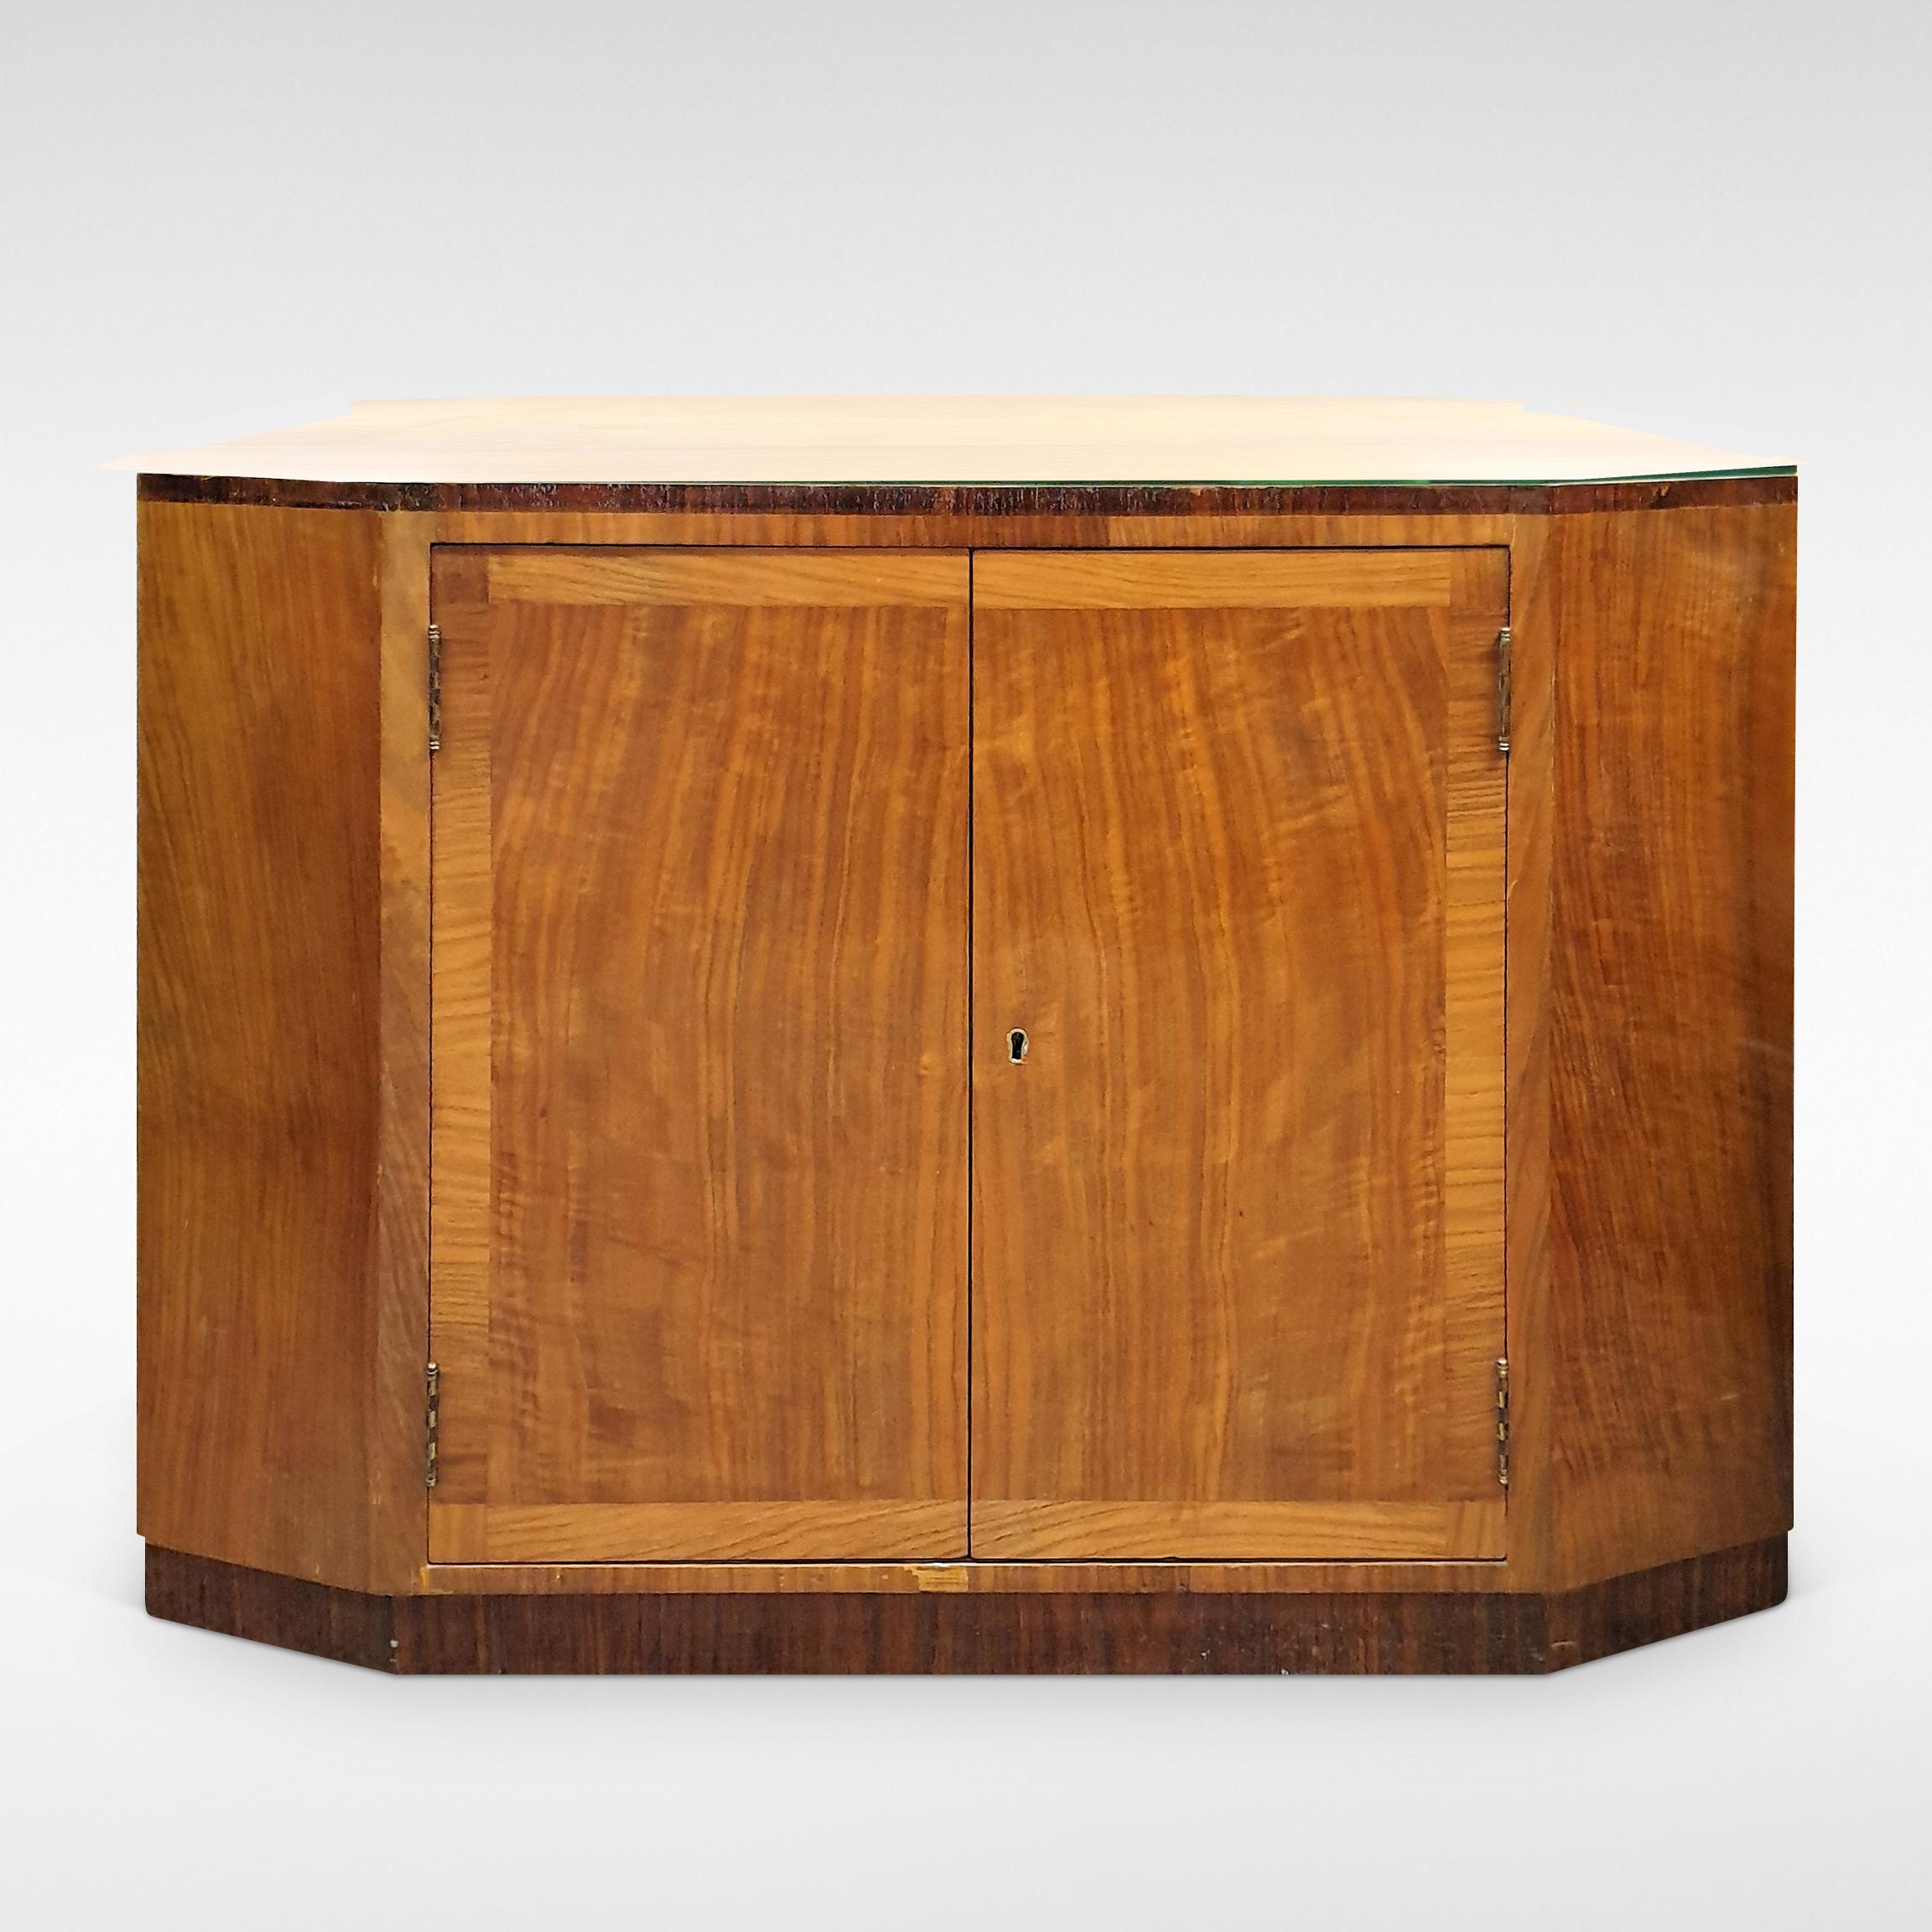 This superb quality cocktail, drinks or sherry table could well have been a design by Serge Chermayeff for Waring & Gillow. It opens on both sides as shown for storage and dispensing drinks, and is complete with bookshelves at each end,
circa 1930.